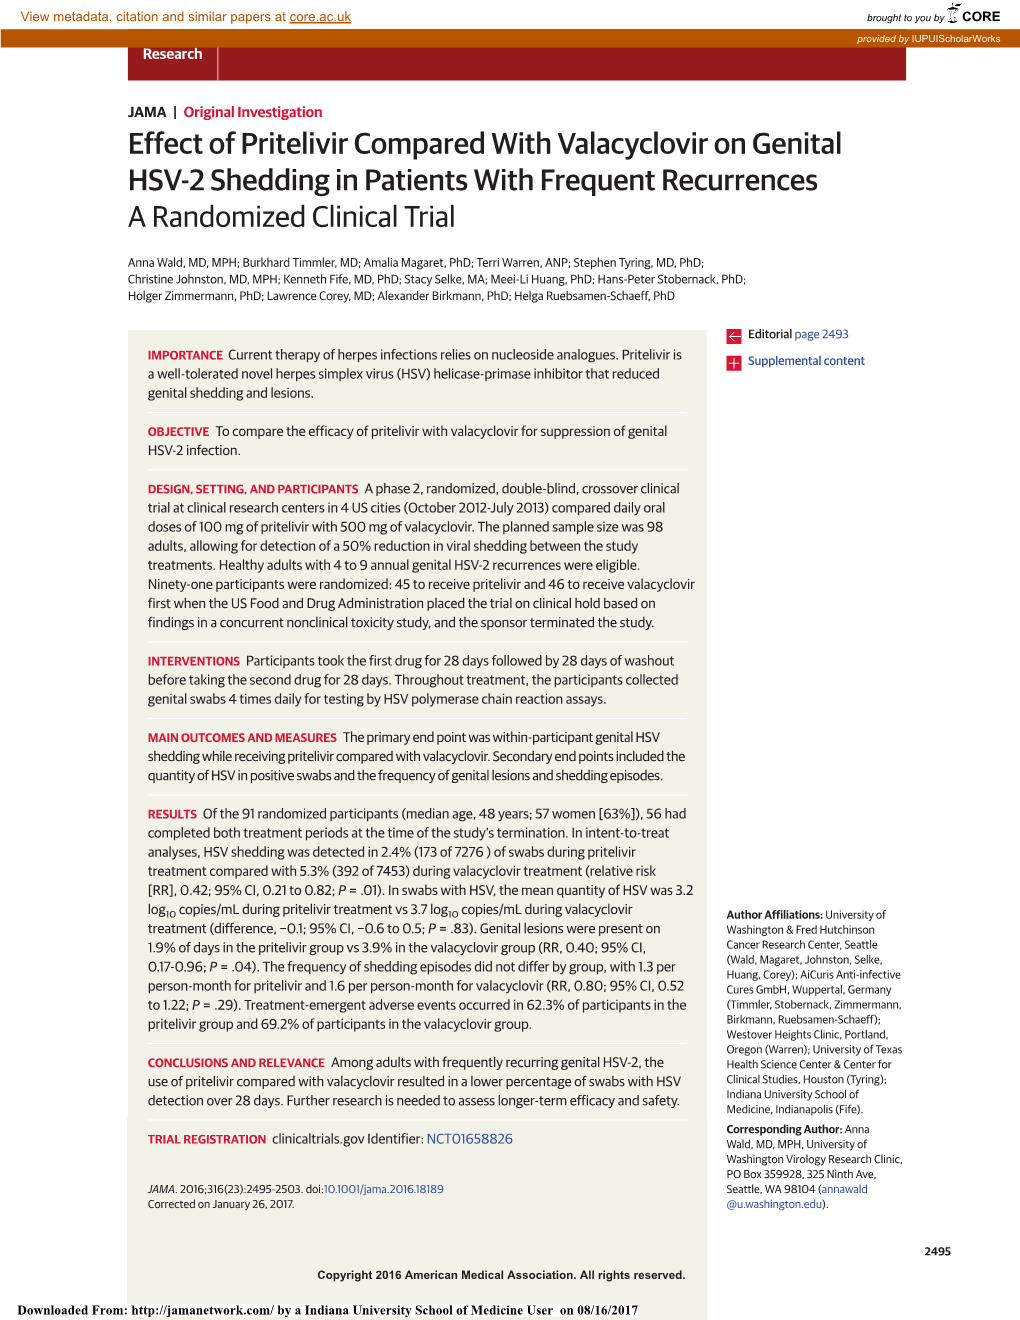 Effect of Pritelivir Compared with Valacyclovir on Genital HSV-2 Shedding in Patients with Frequent Recurrences a Randomized Clinical Trial